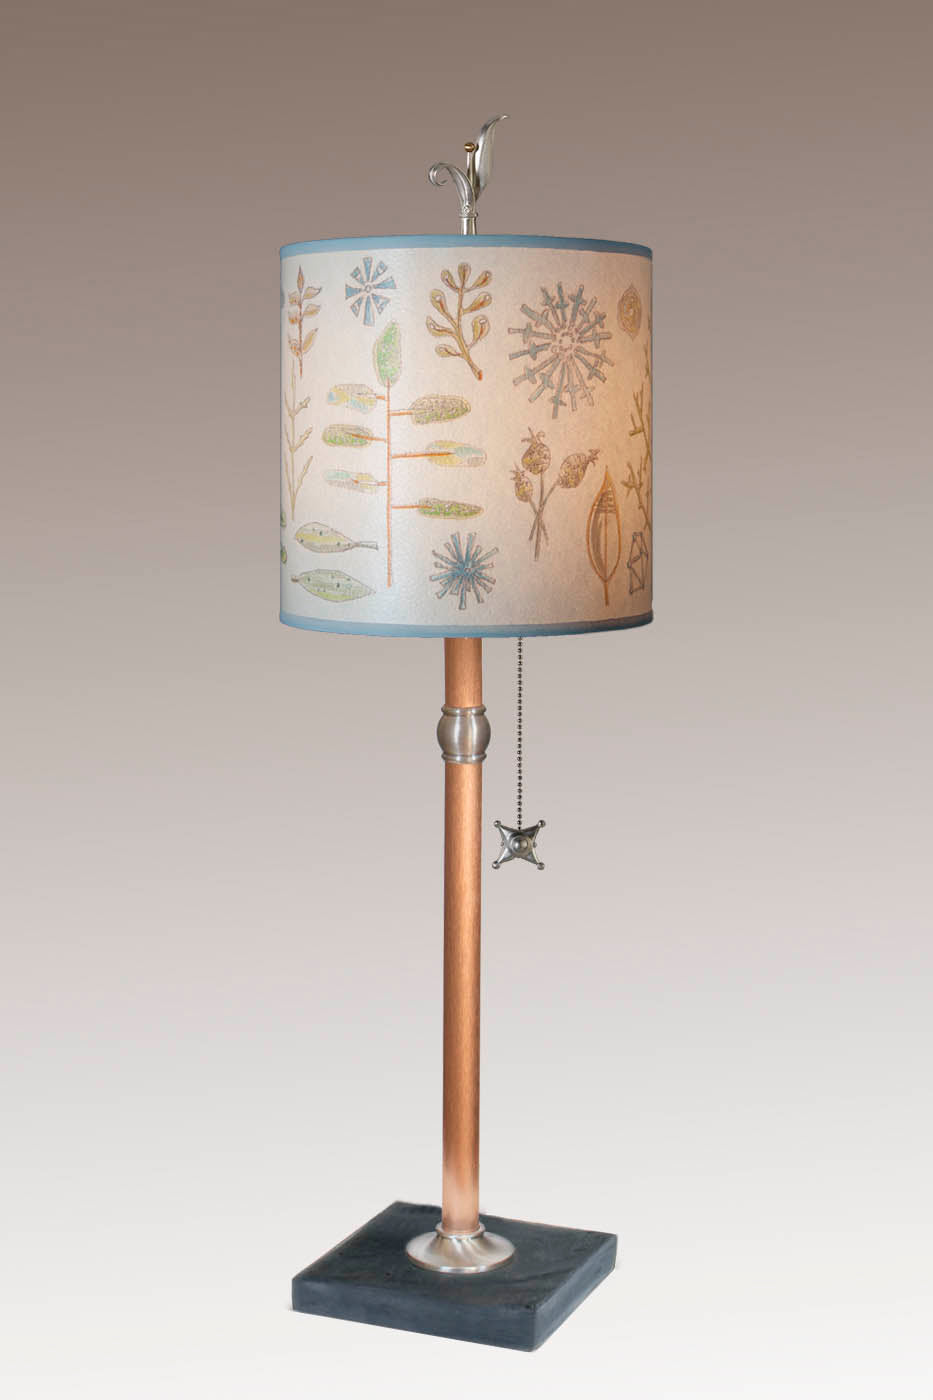 Janna Ugone & Co Table Lamp Copper Table Lamp with Medium Drum Shade in Field Chart